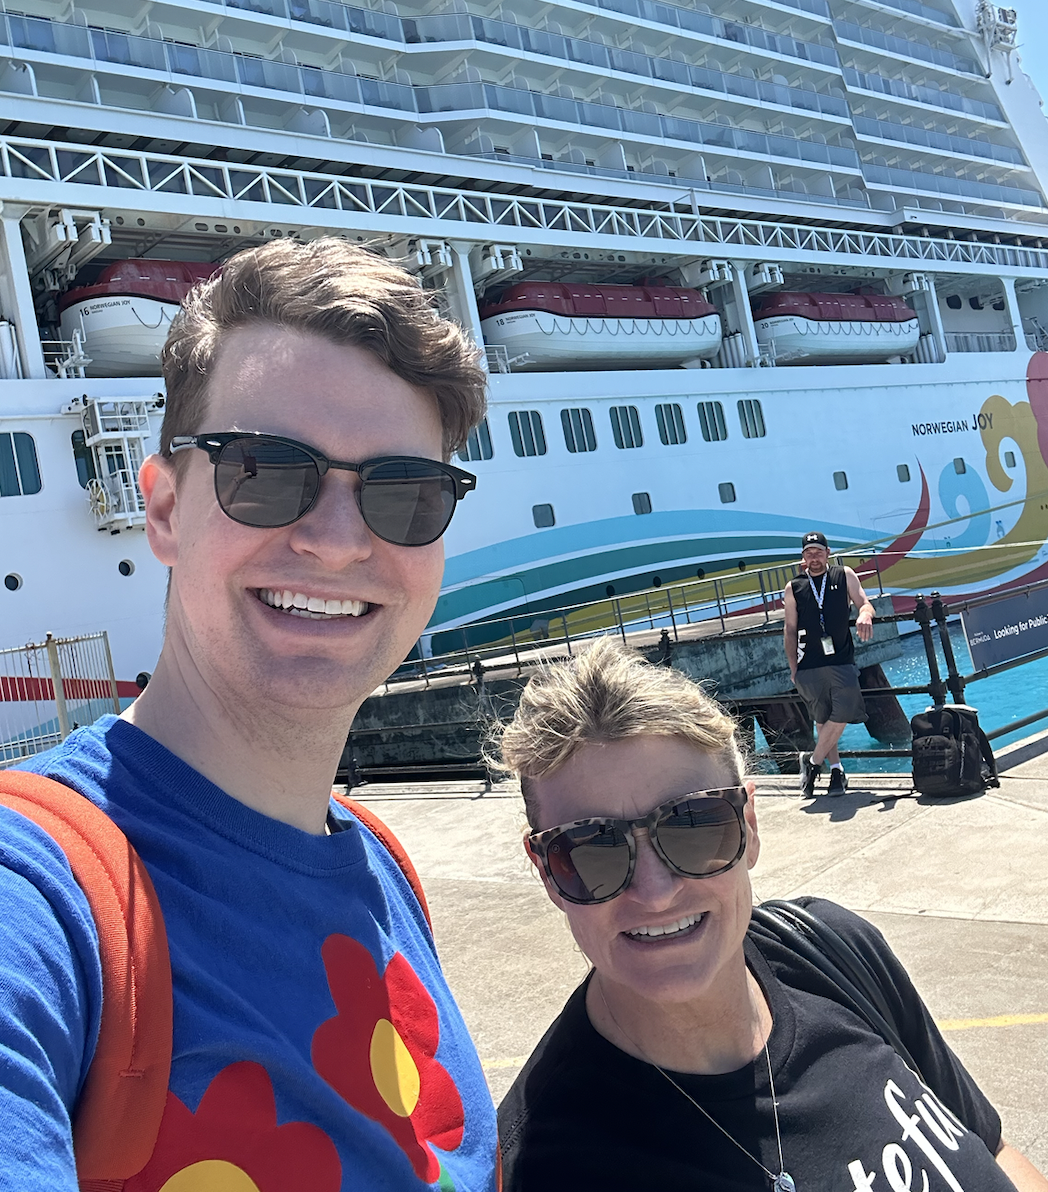 Zach Zimmerman and his mom in front of the cruise ship